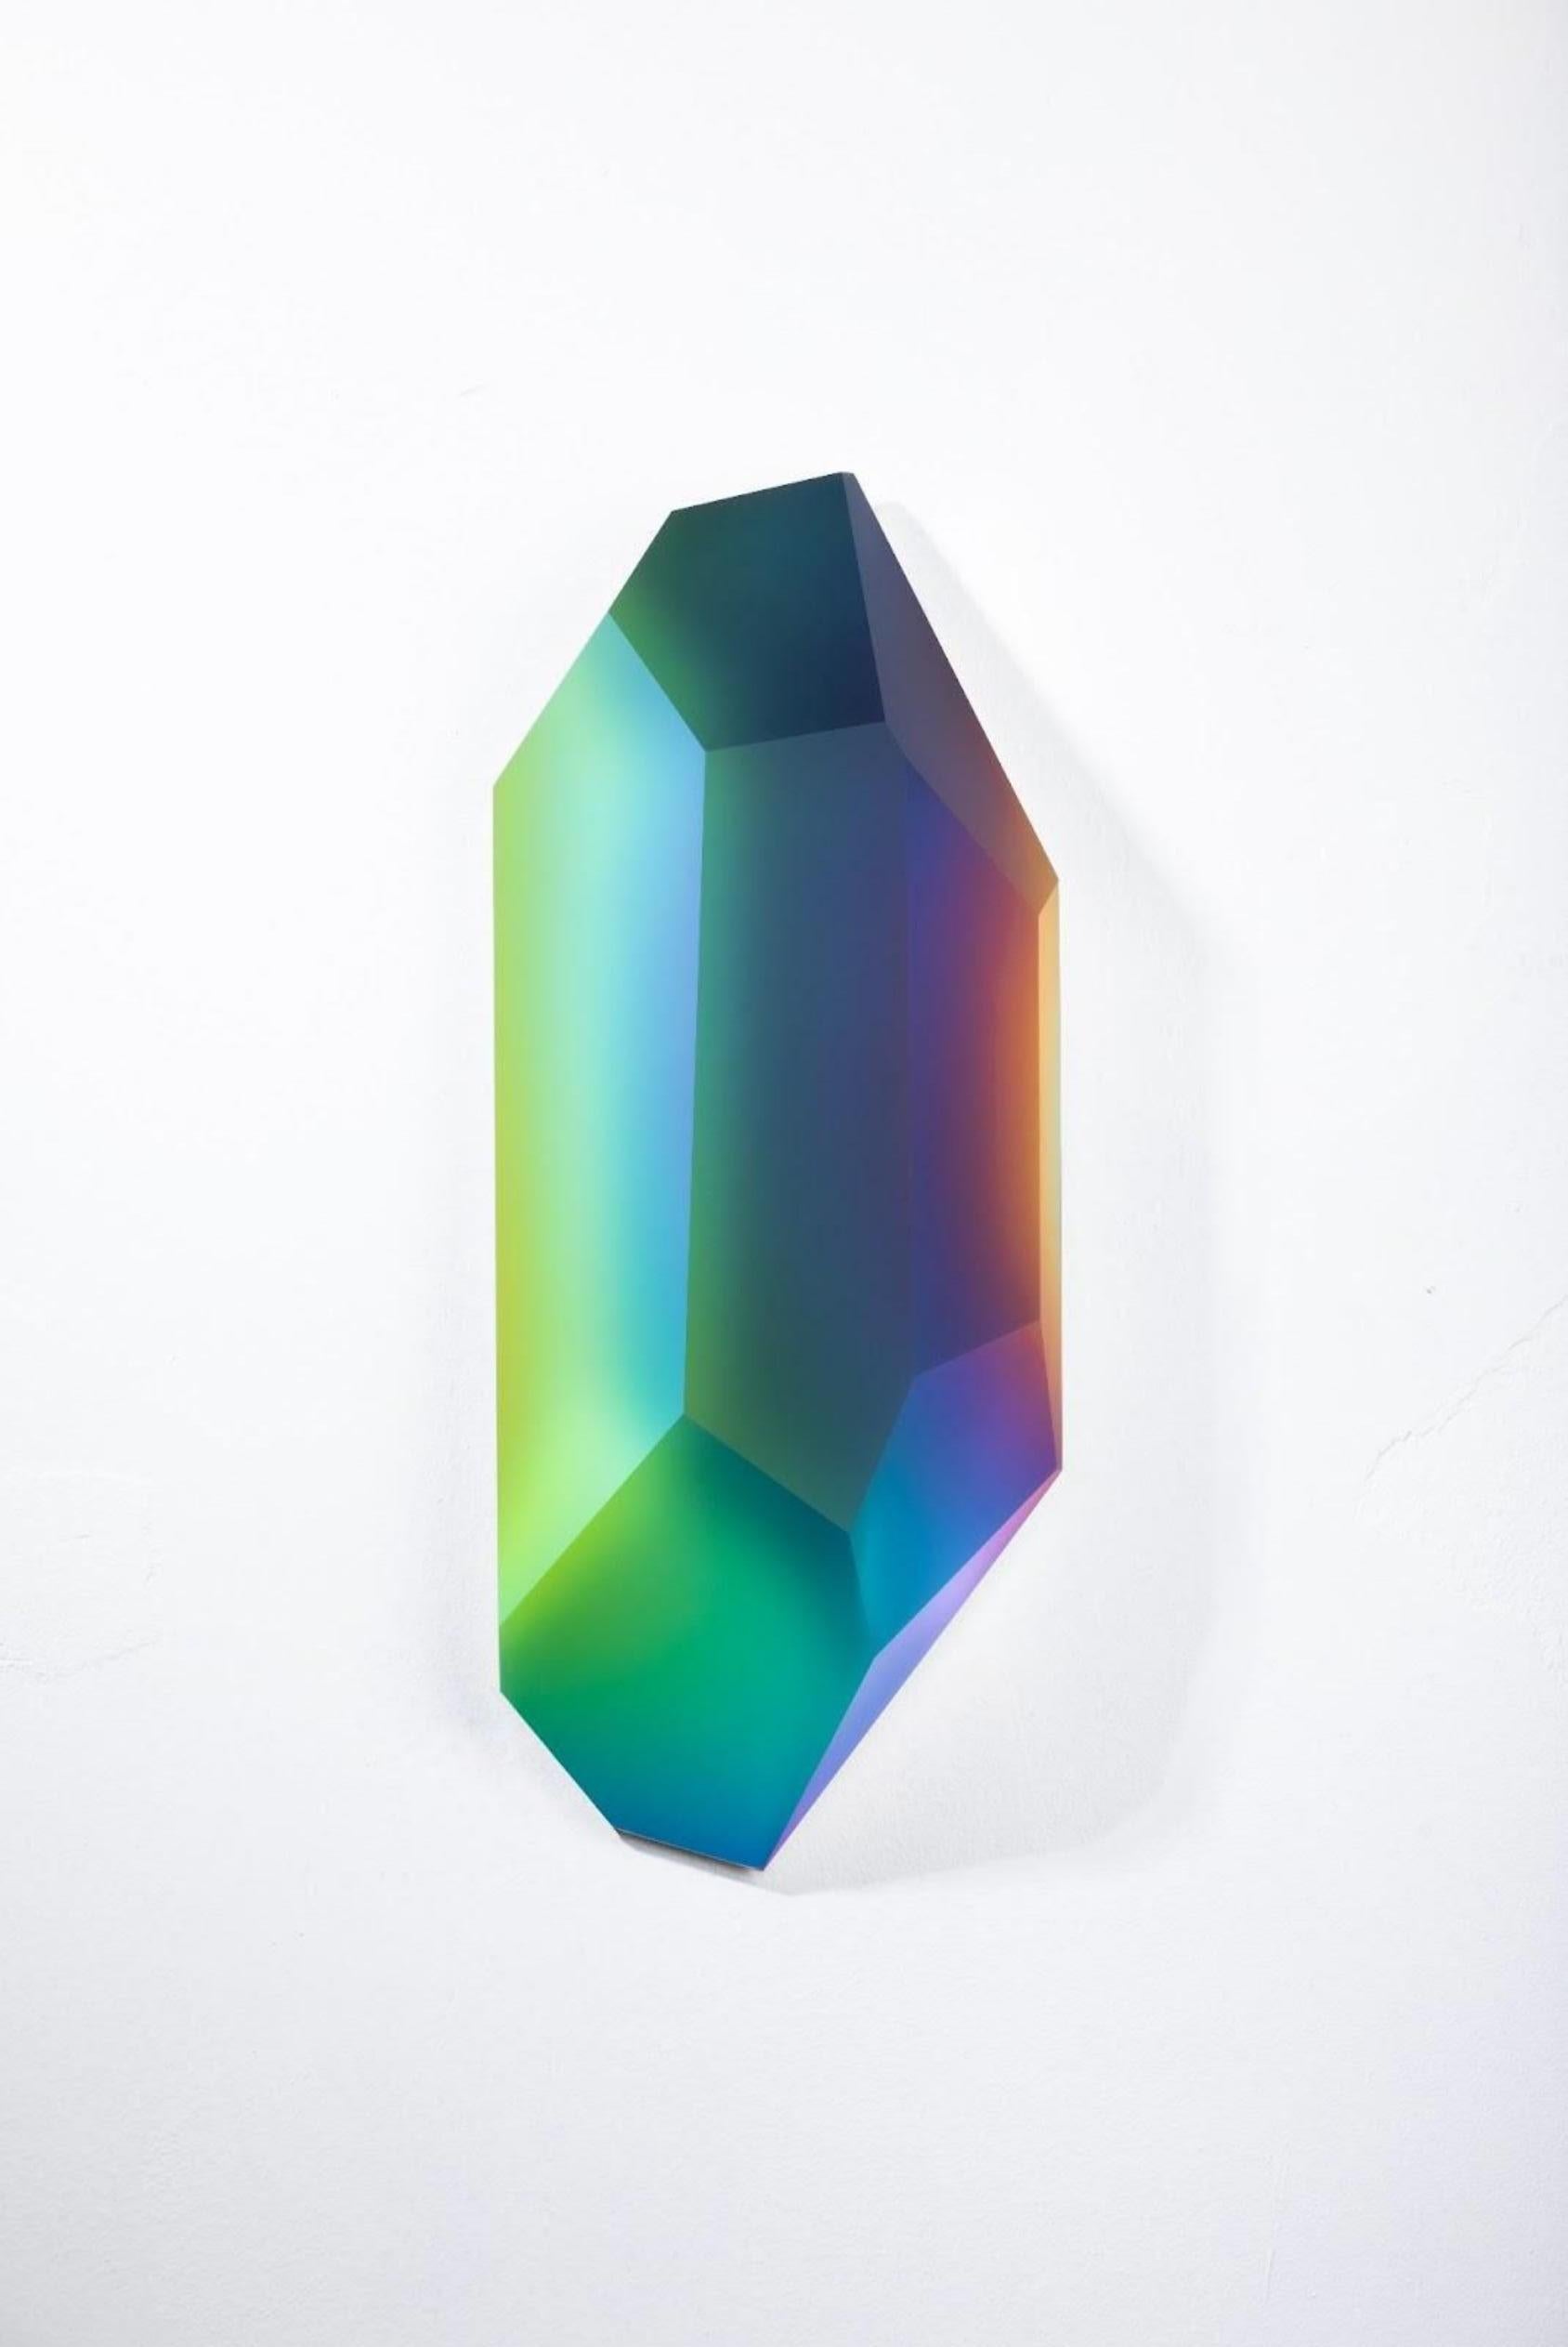 Pretty Mirage 0904 by Lukas Novak
Dimensions: W 12 x D 23 x H 54 cm
Materials: Cut Glass, Crystal, Color Gradient

The Pretty Mirage series is made out of wall crystals. It is a unique composition of cuts in glass and a color gradient. Lukas Novak